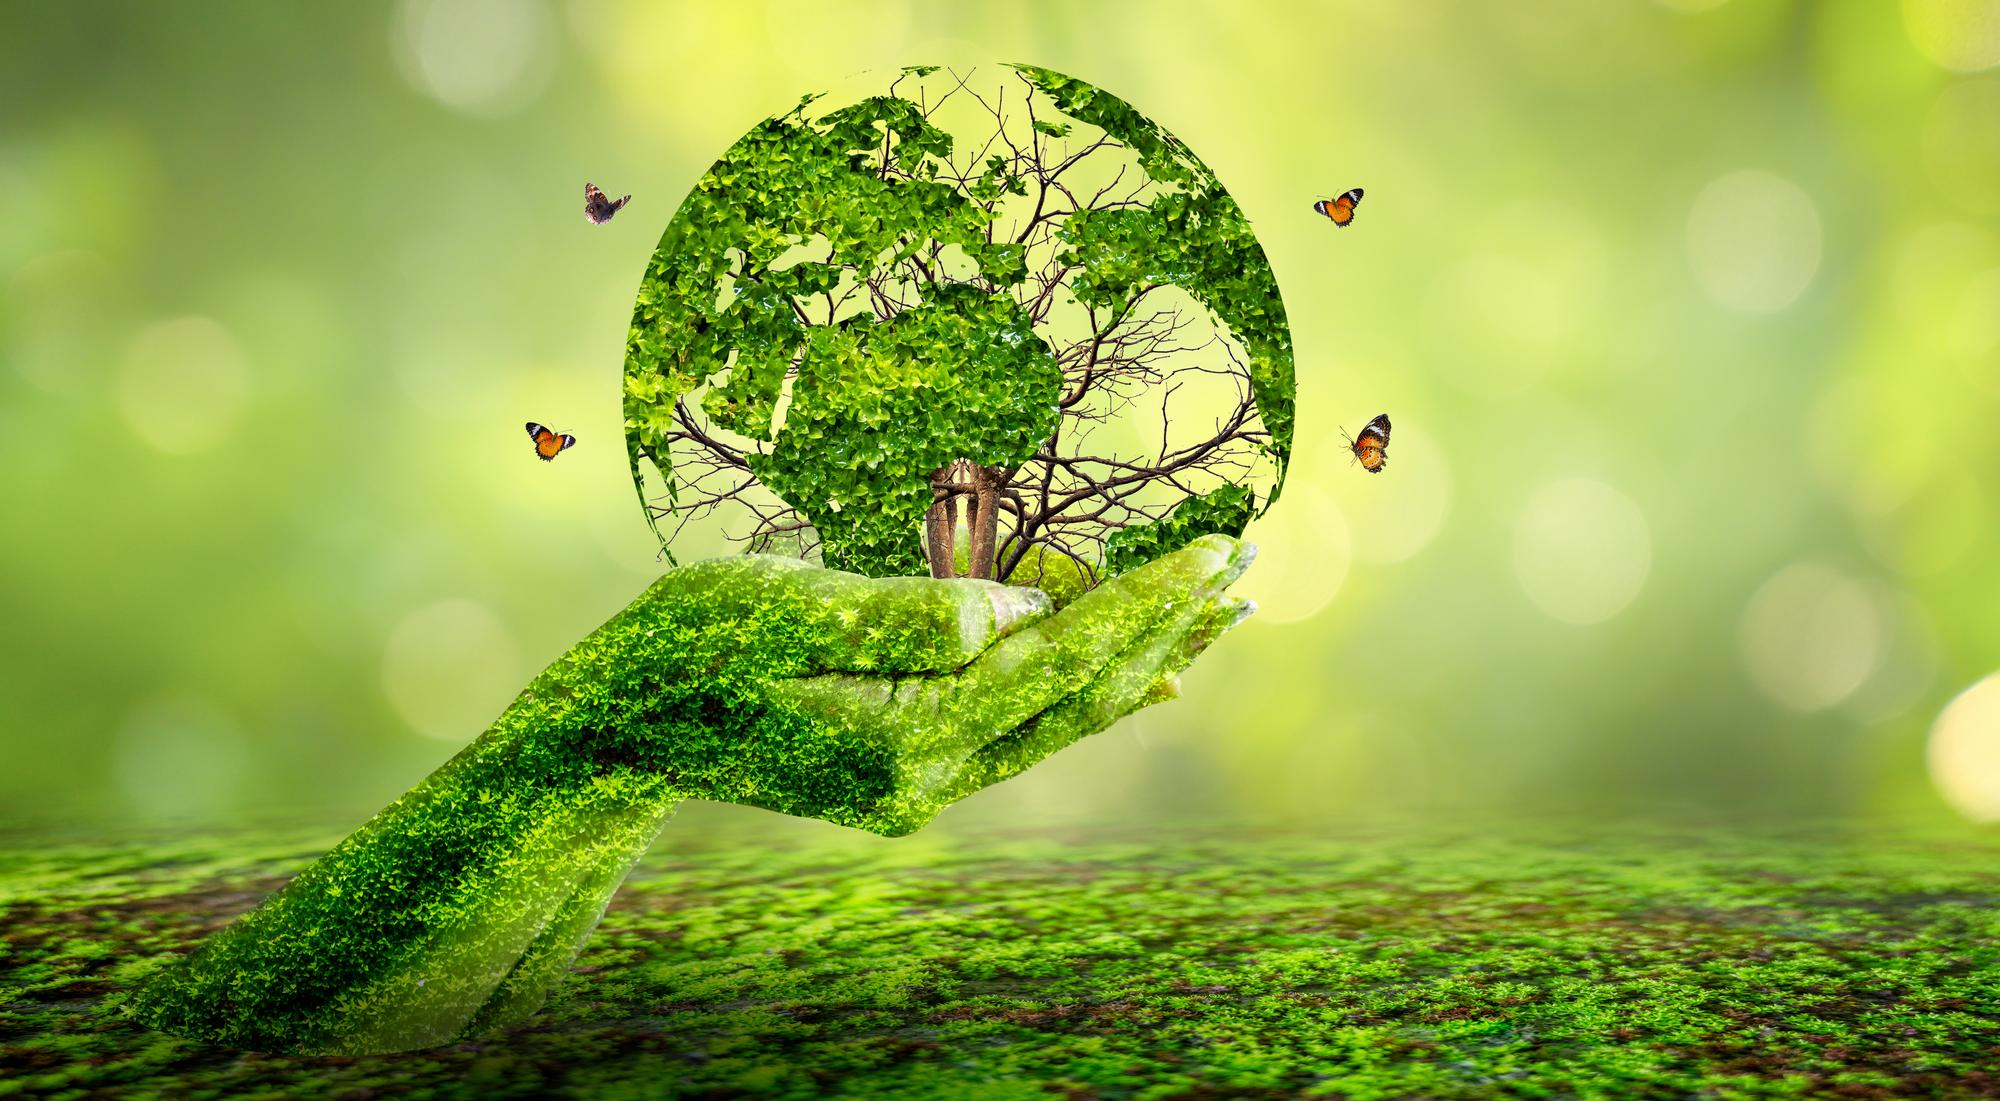 Hindi-GK Questions and Answers on World Environment Day